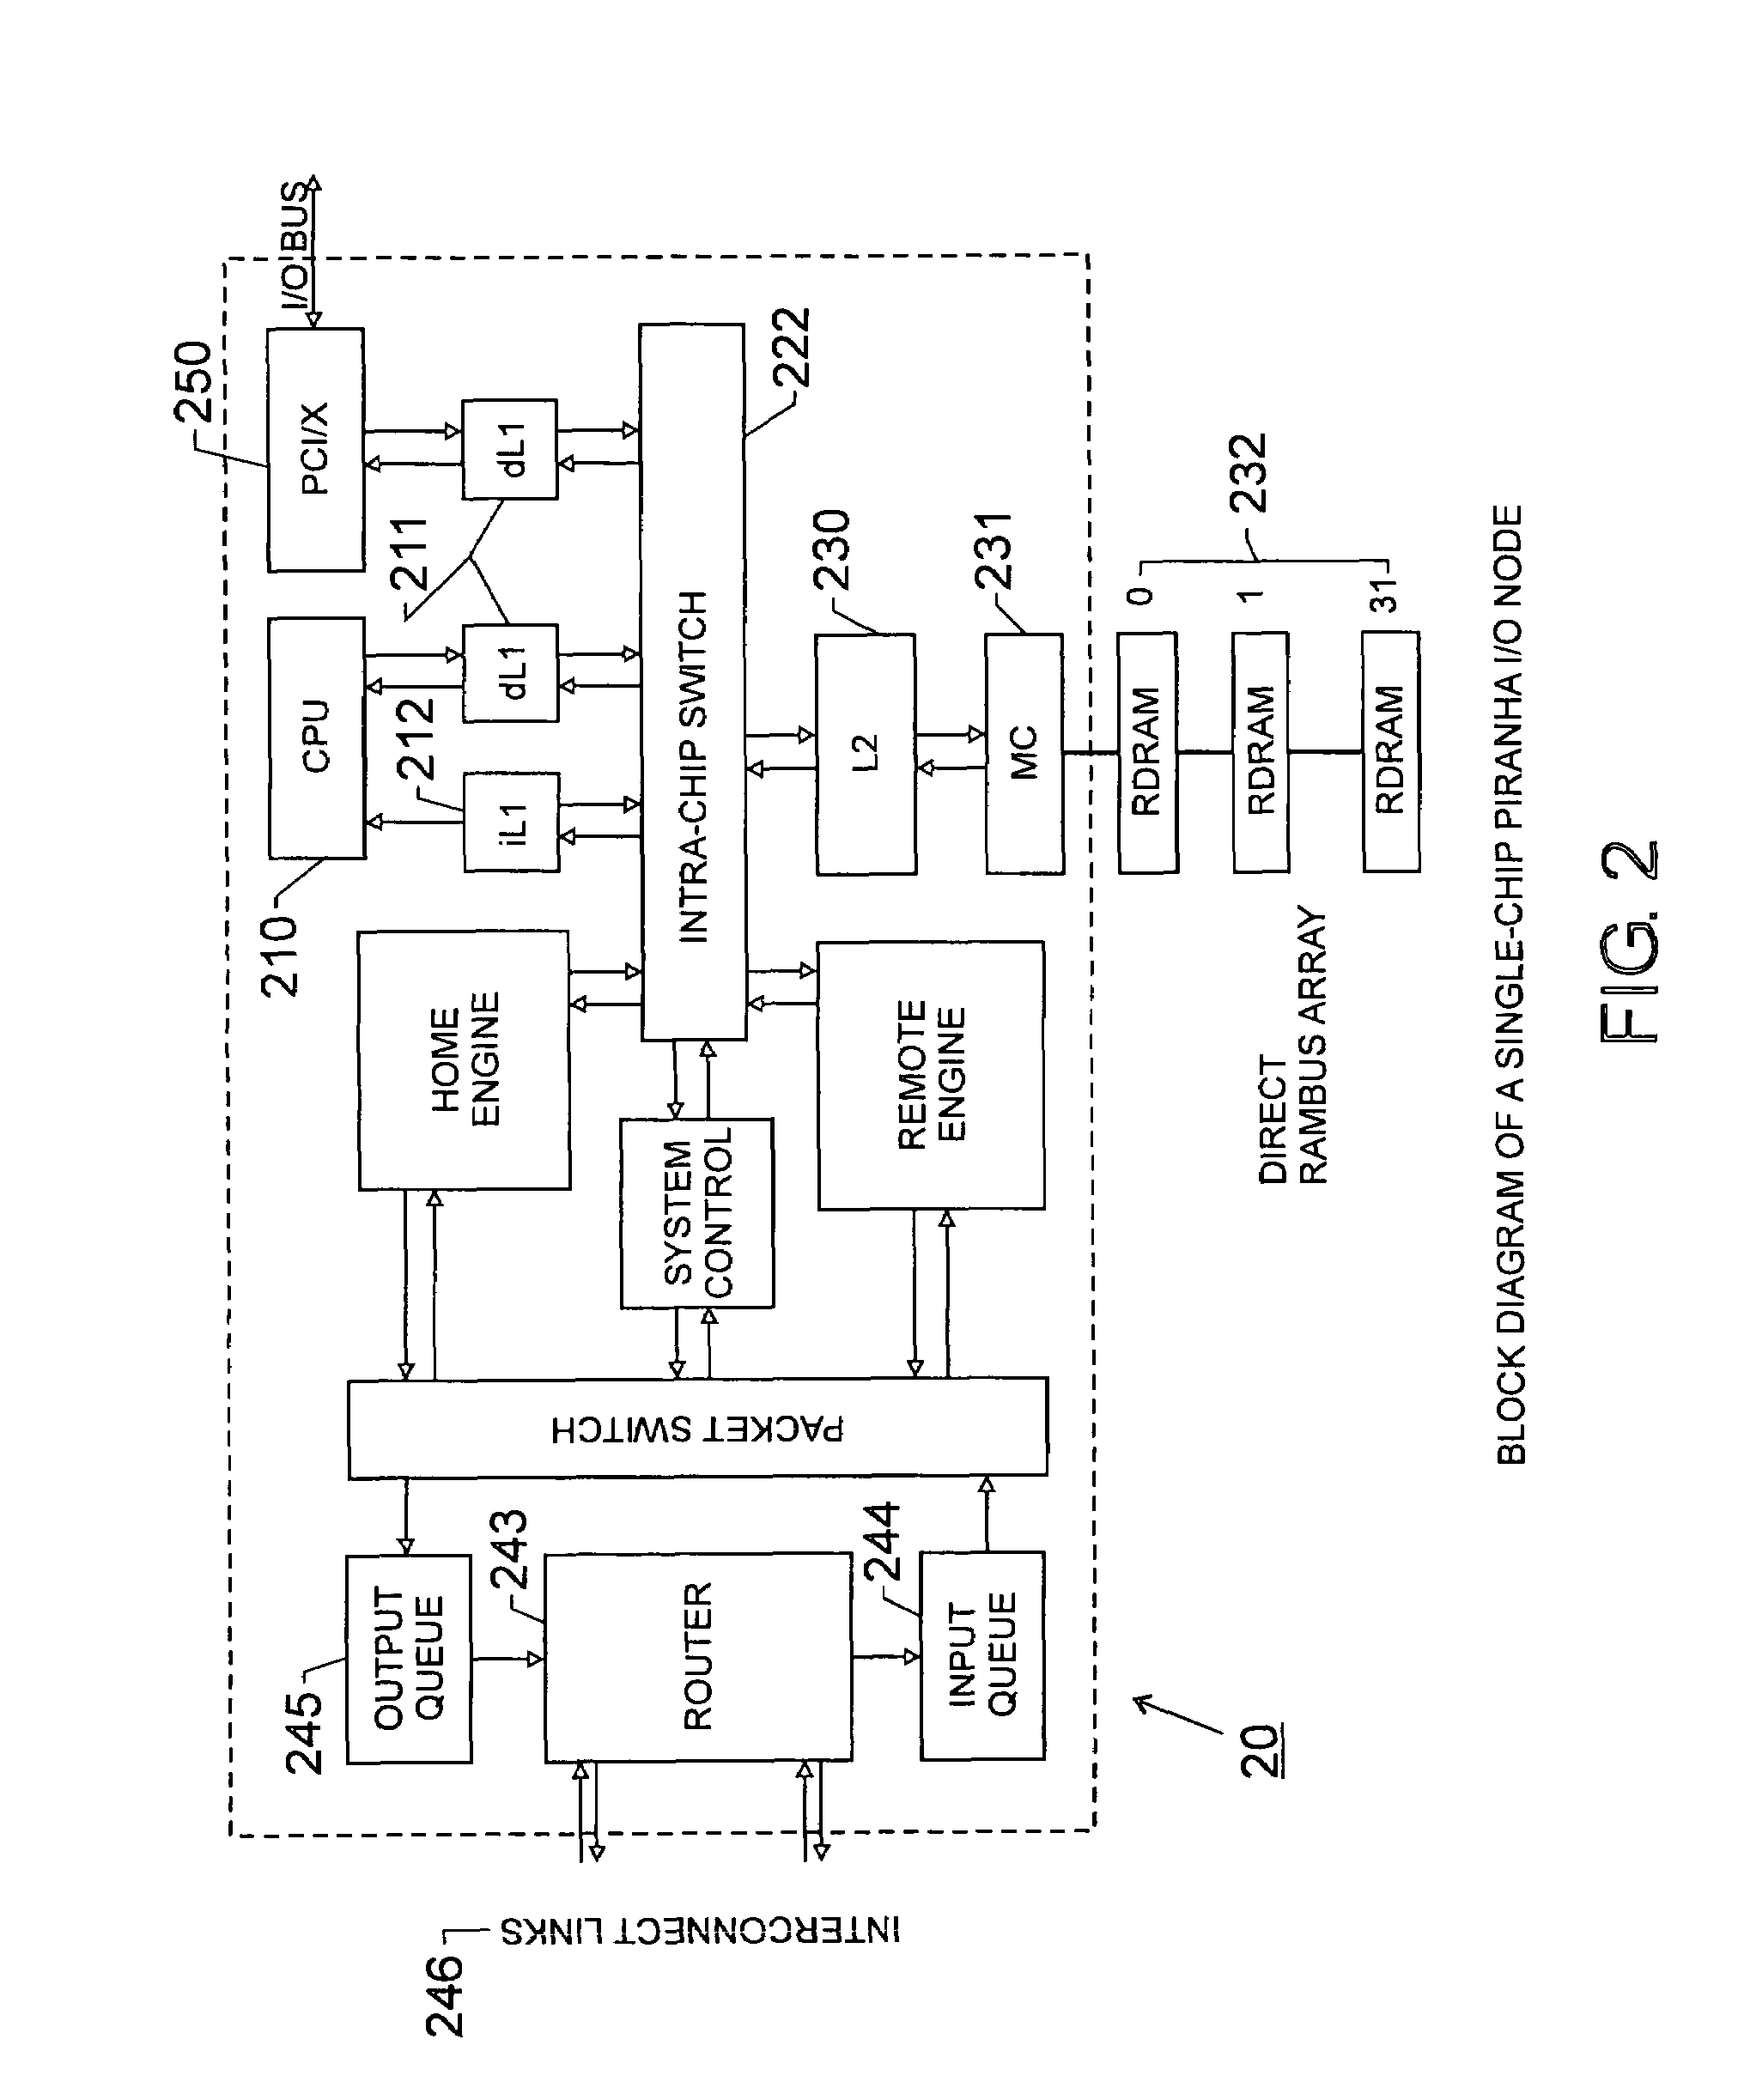 Scalable architecture based on single-chip multiprocessing